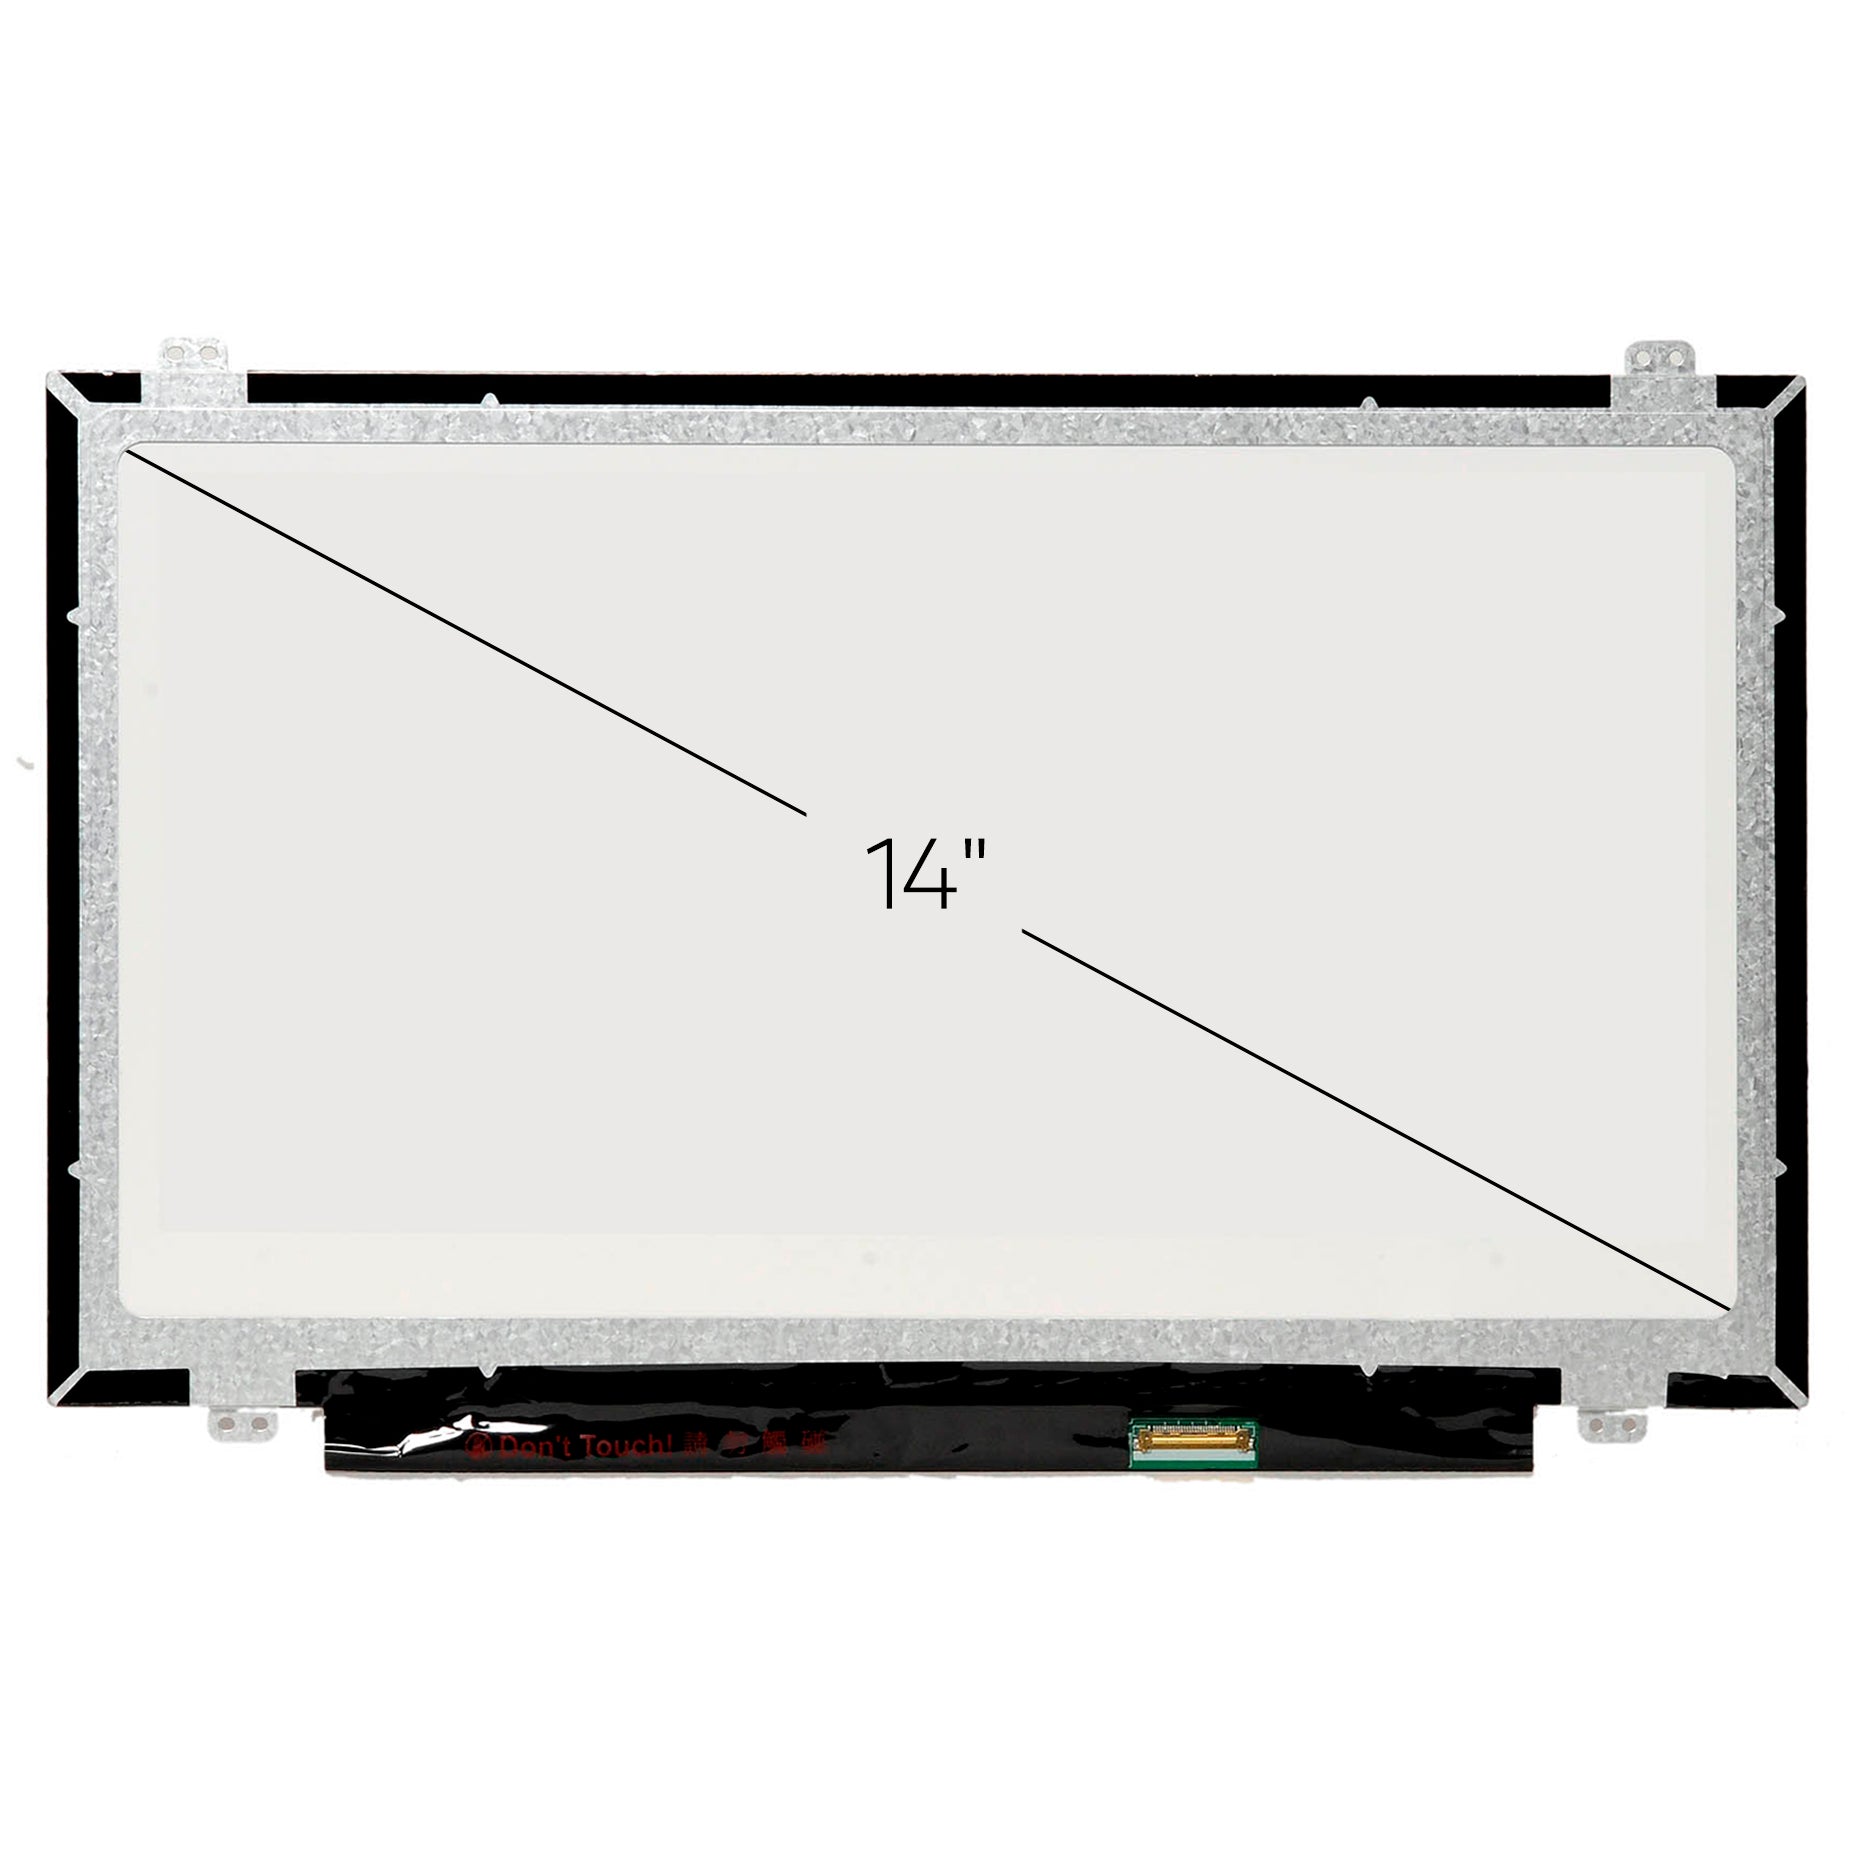 Screen Replacement for Dell Inspiron 3443 HD 1366x768 Glossy LCD LED Display